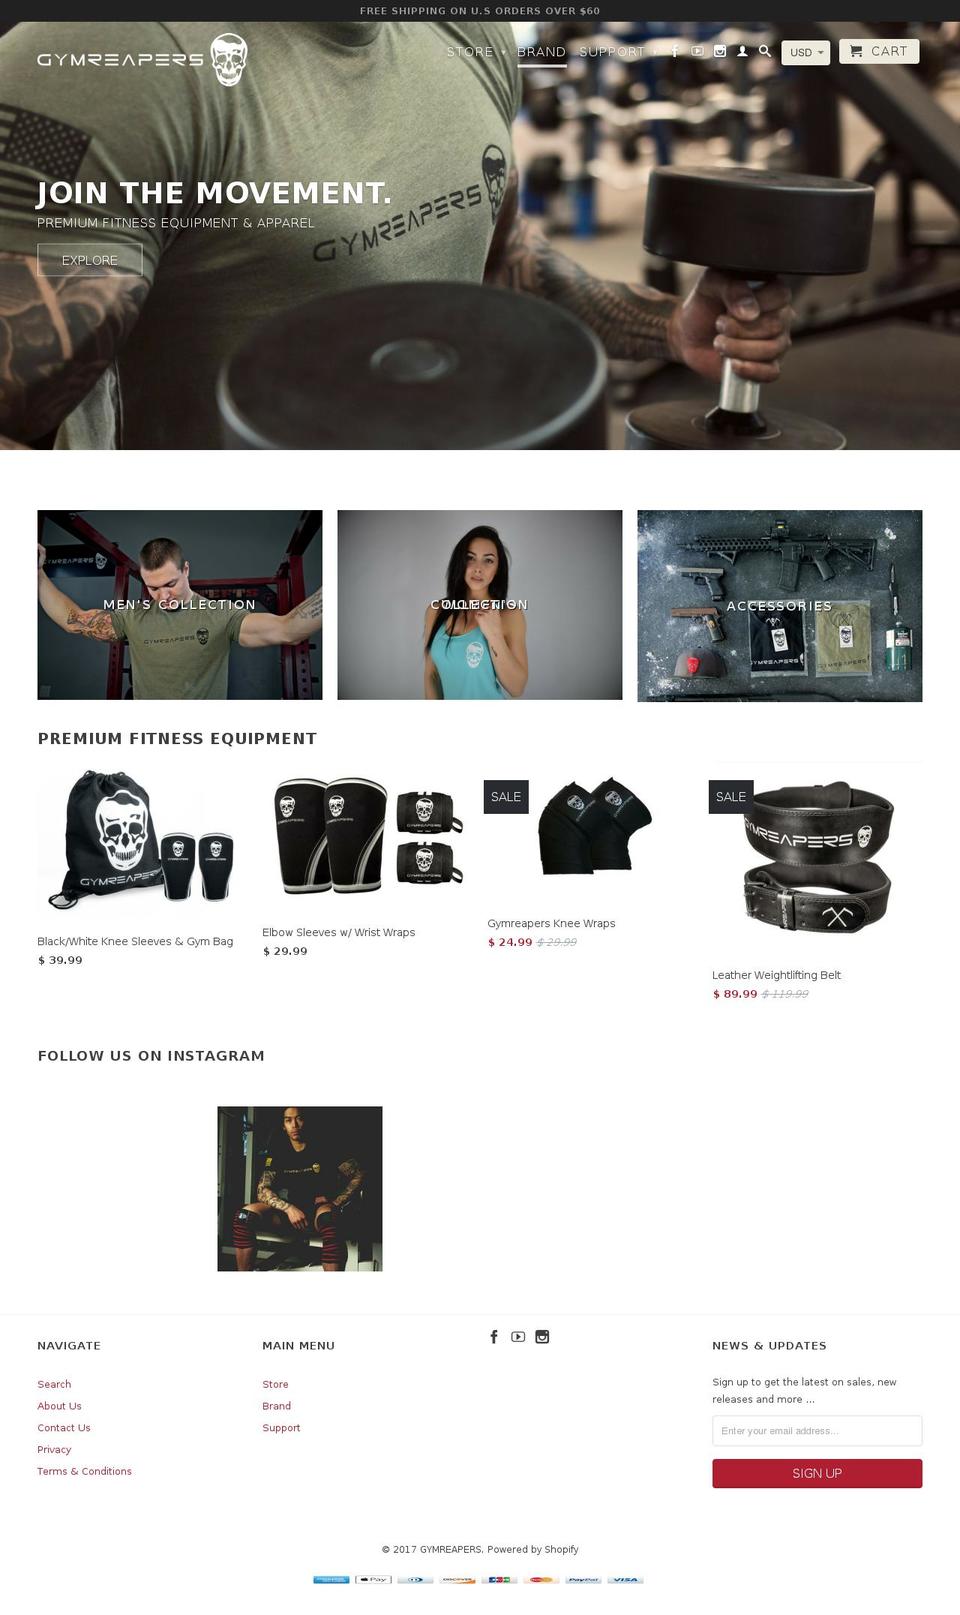 Impact Shopify theme site example gymreapers.com